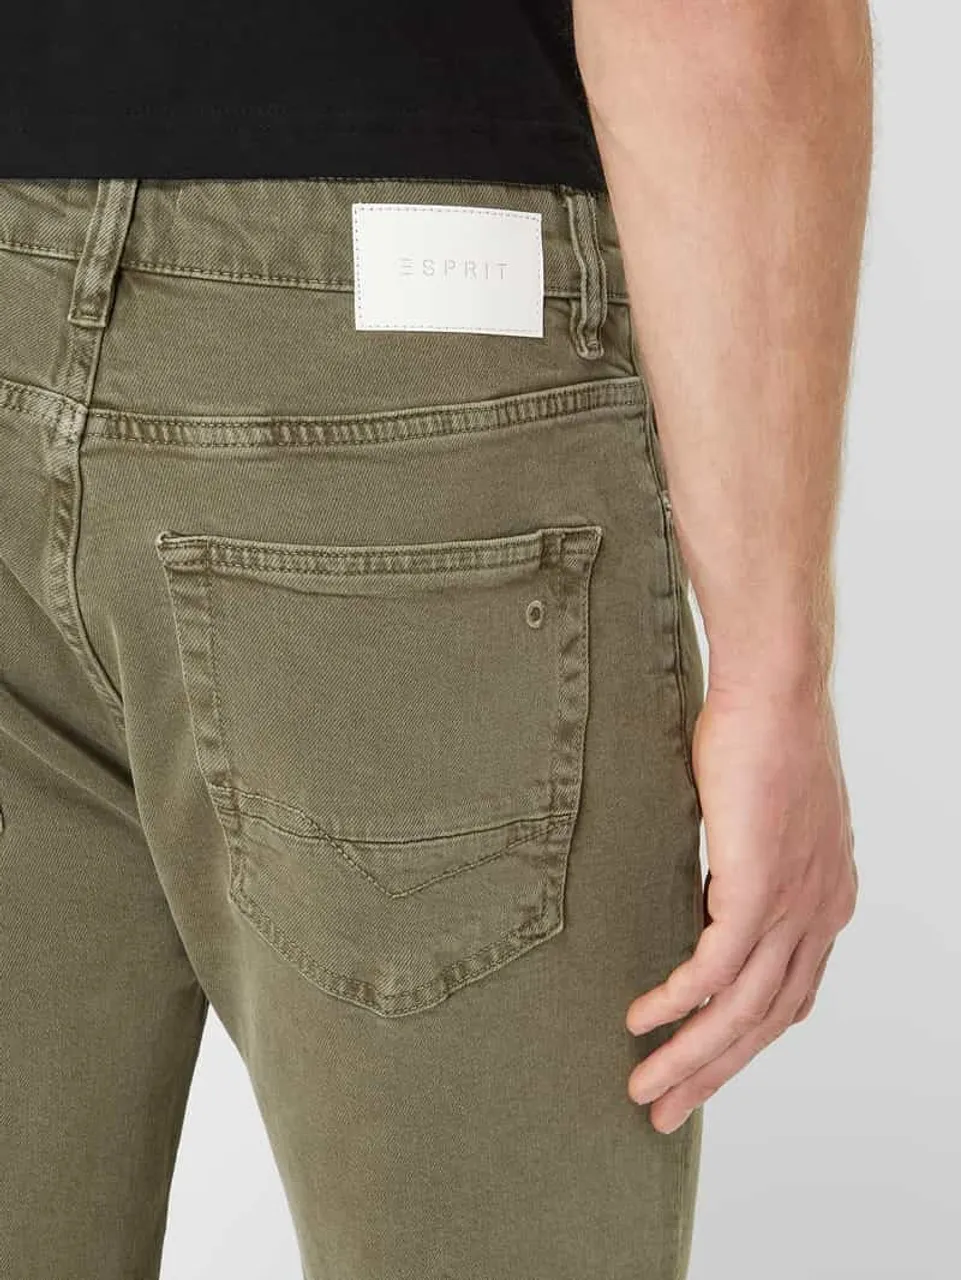 Esprit Relaxed Fit Jeansbermudas mit Lyocell-Anteil in Oliv